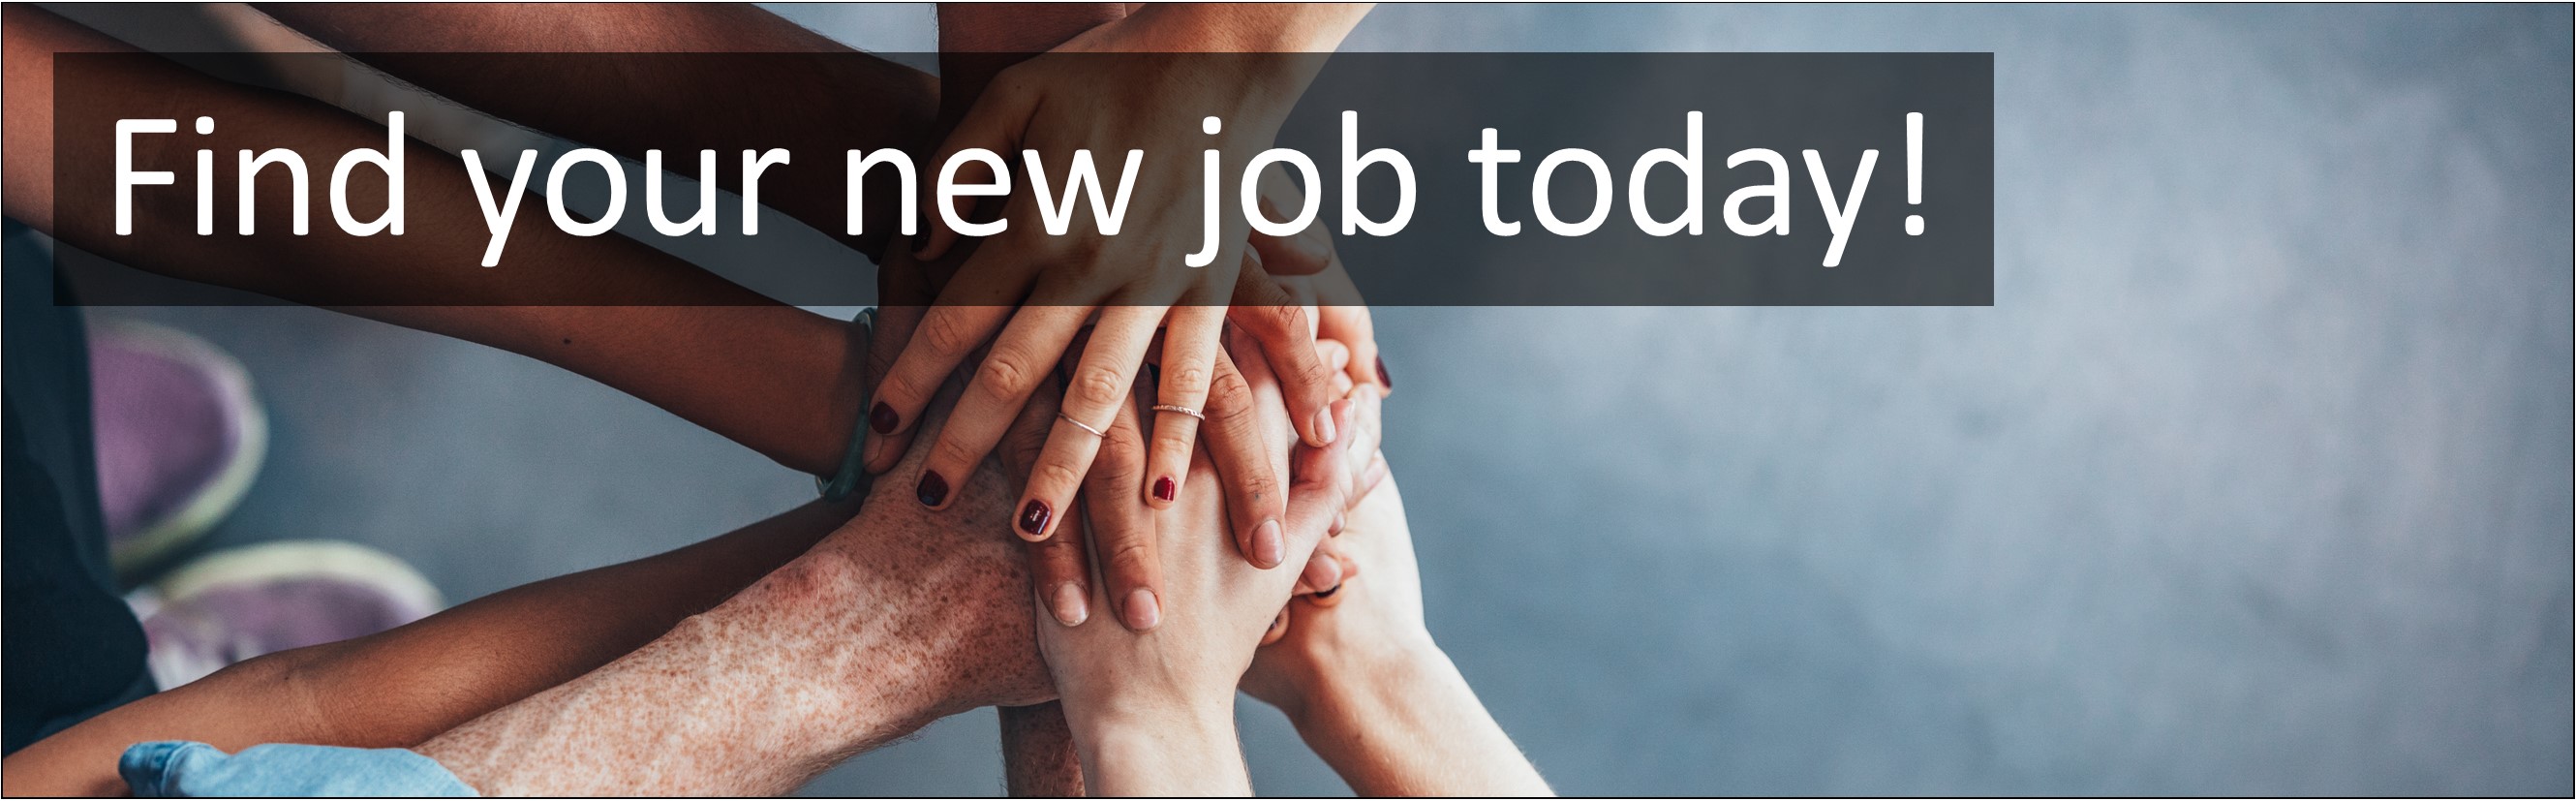 Social Care Jobs. Group Activities Team Leader / Support Worker Jobs, Careers & Vacancies in Chesham, Buckinghamshire, South East England Advertised by AWD online – Multi-Job Board Advertising and CV Sourcing Recruitment Services